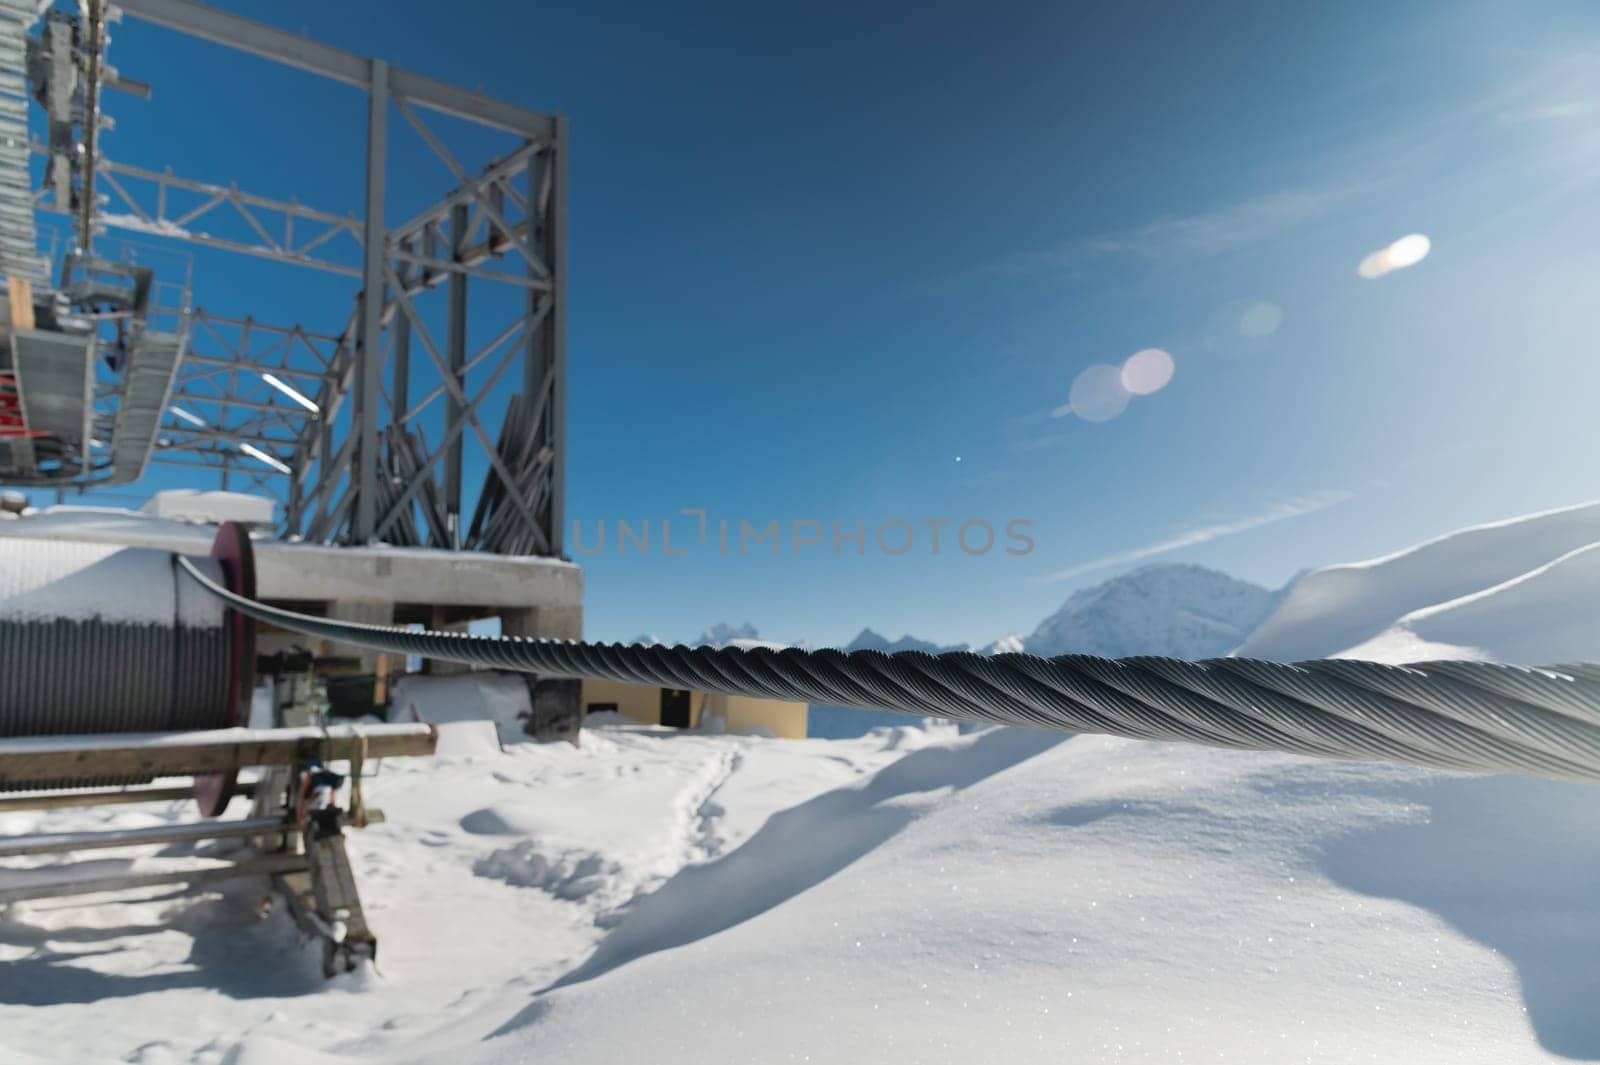 A cable car station high in the mountains under construction. Snowy mountain landscape and construction of a metal structure for a cable car.